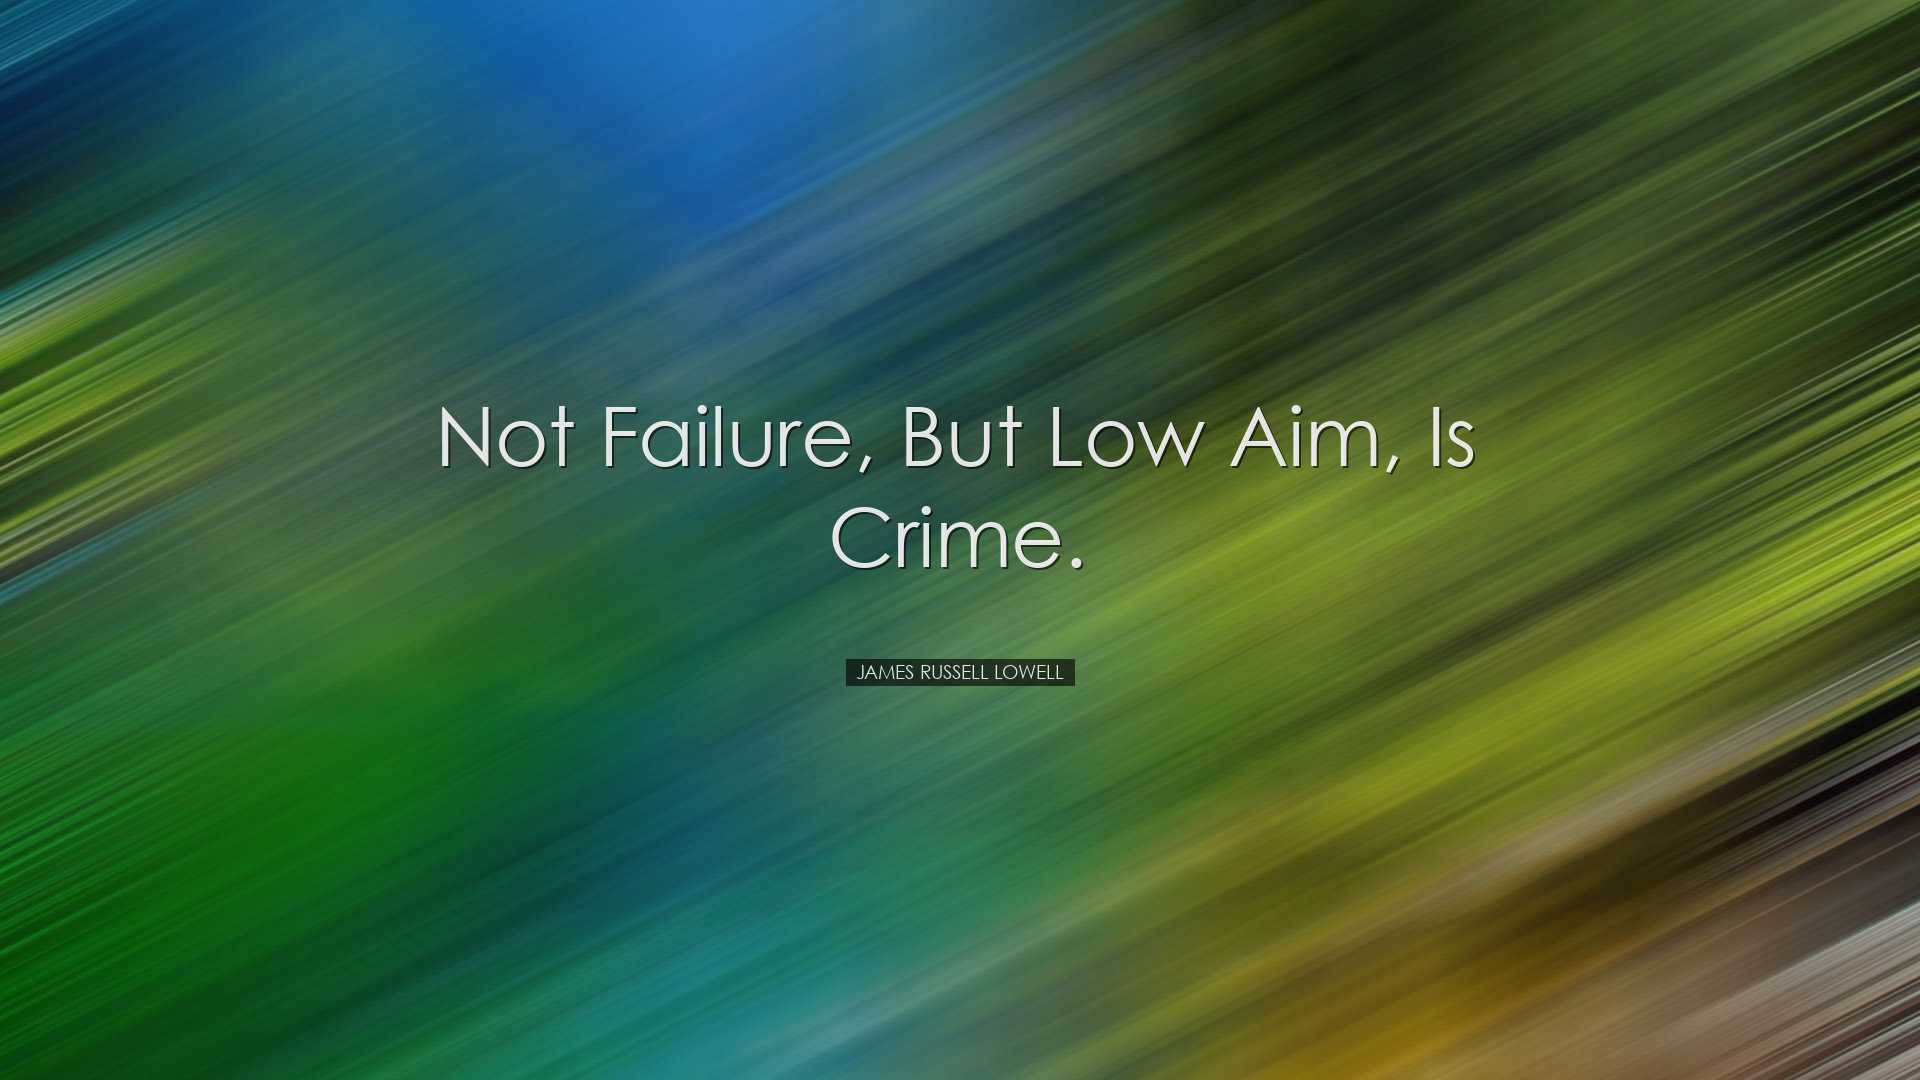 Not failure, but low aim, is crime. - James Russell Lowell